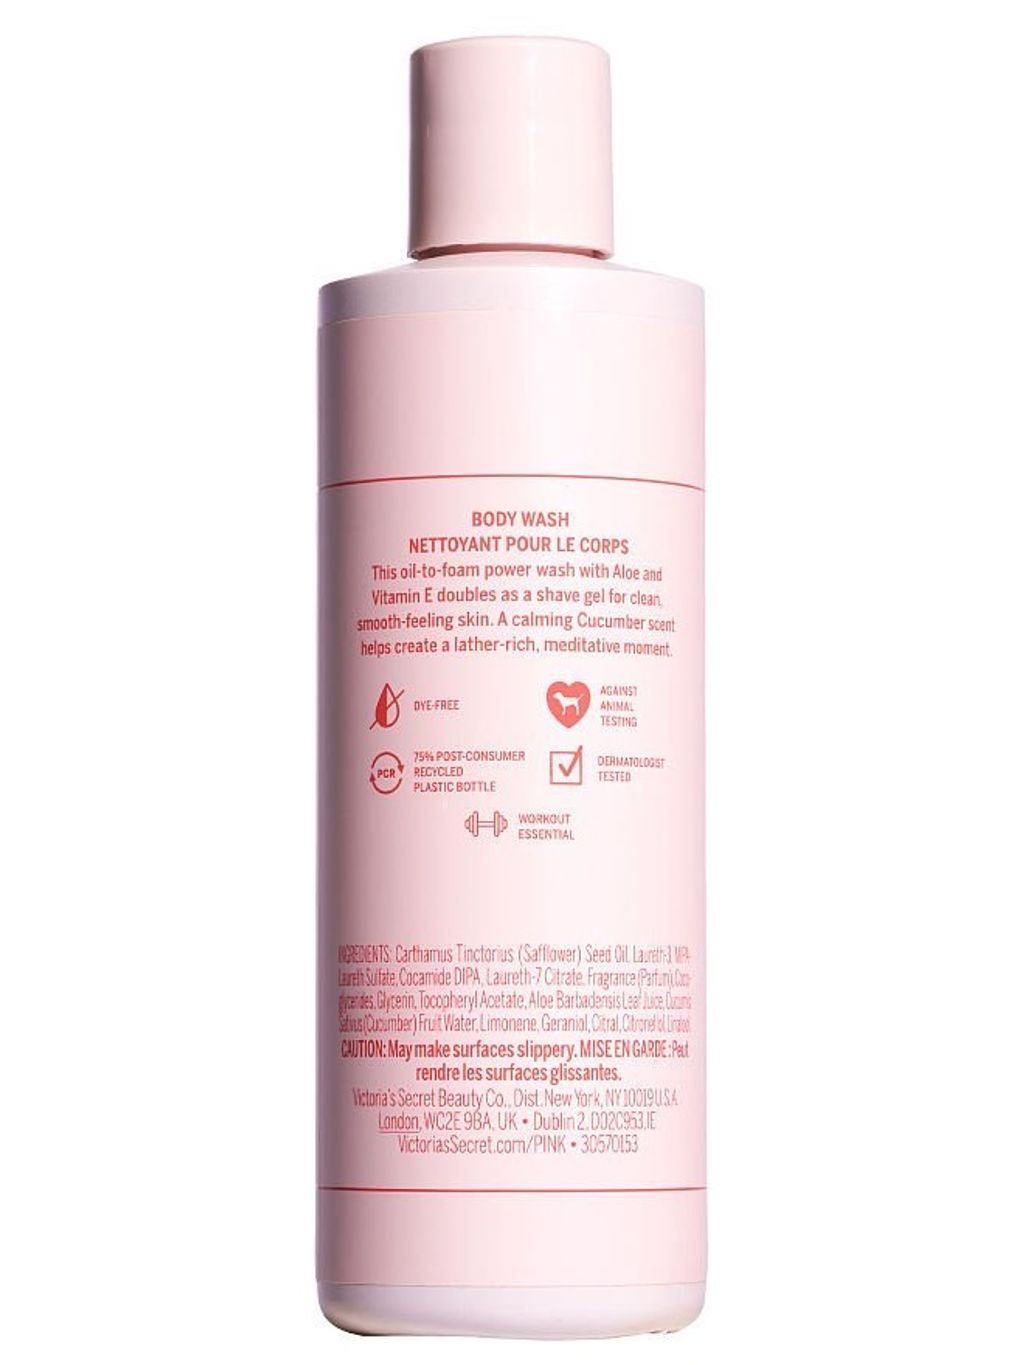 Victoria's Secret PINK Seamless Shower and Shave Cleansing Oil